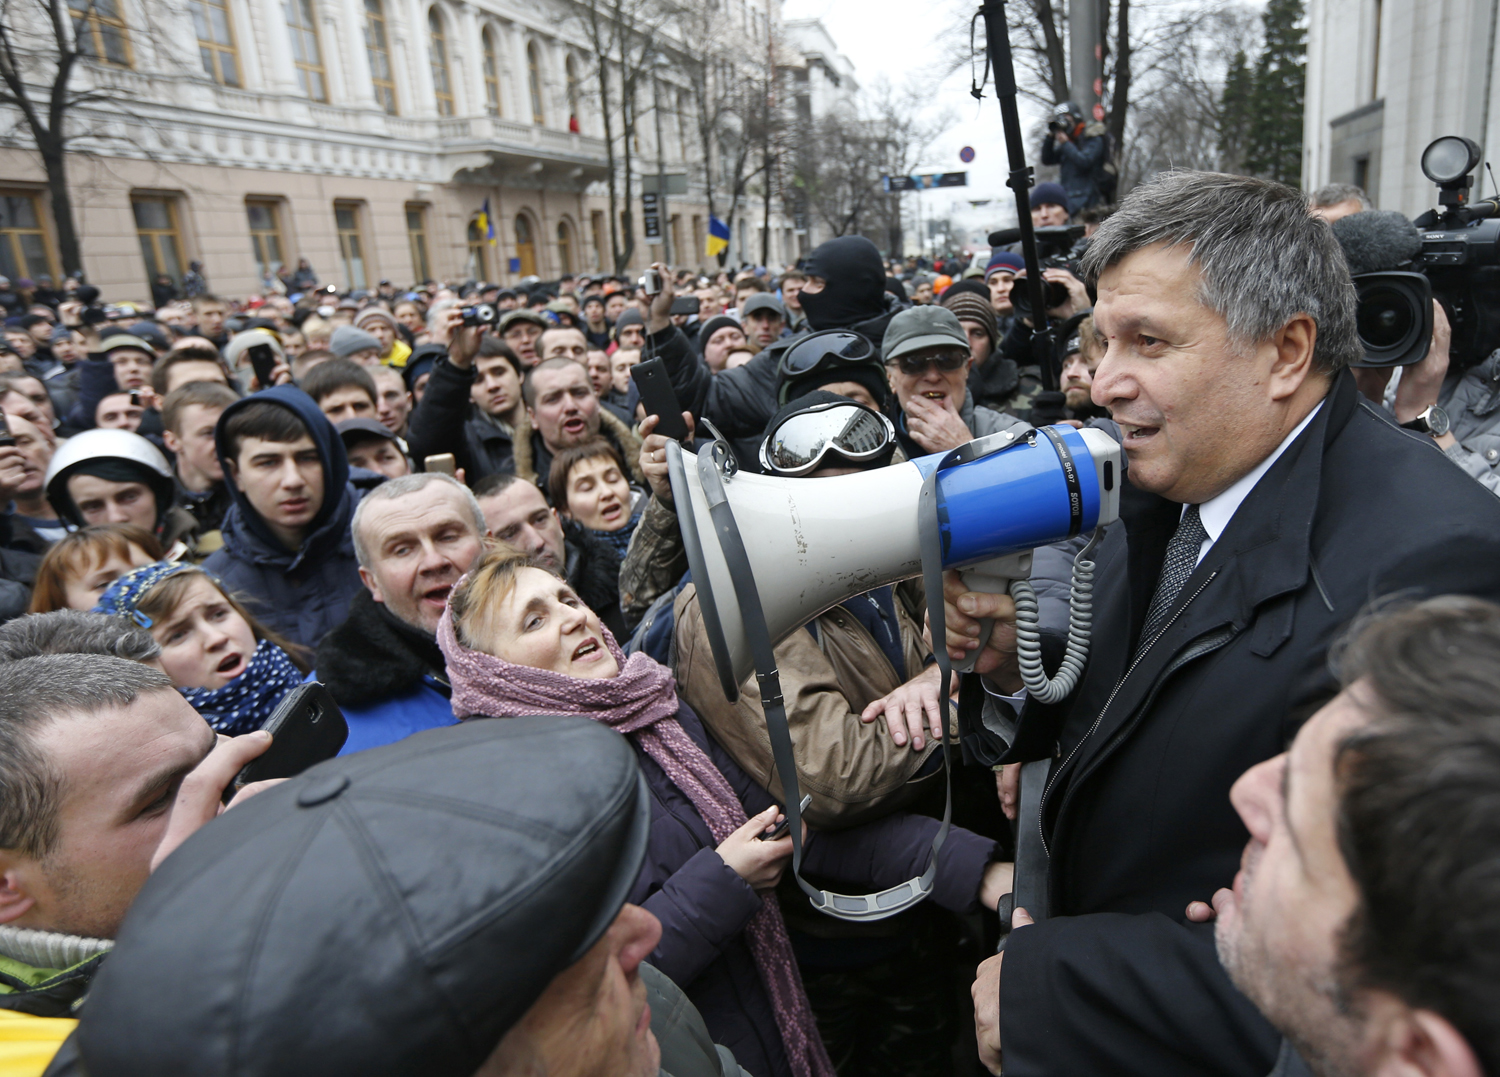 Newly elected Ukrainian interior minister Arsen Avakov holds a loud-speaker as he addresses anti-government protesters outside the Ukrainian parliament building in Kiev